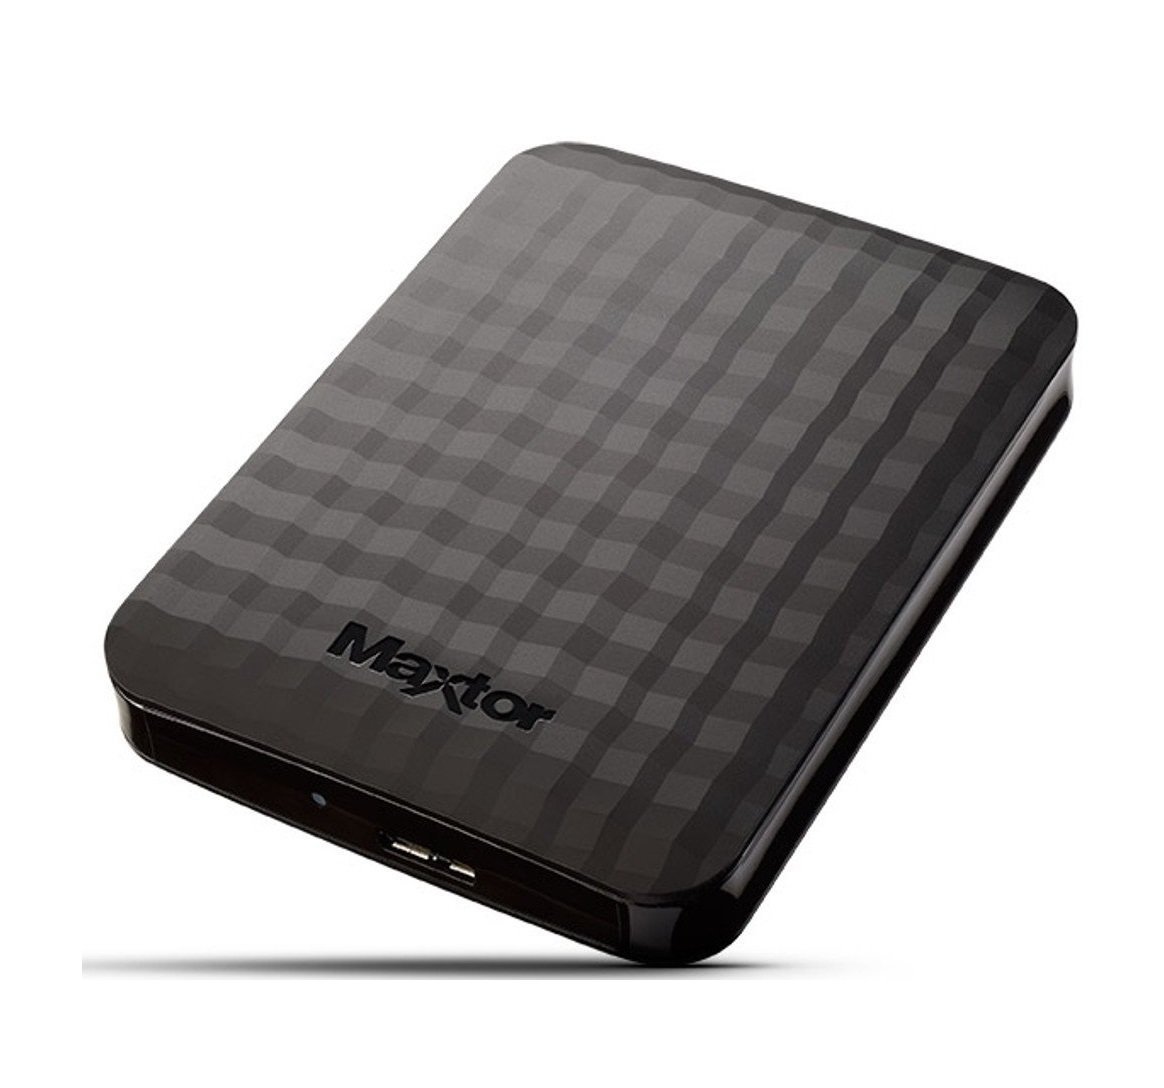 Maxtor 2TB M3 Portable External Hard drive - Manufactured by Seagate